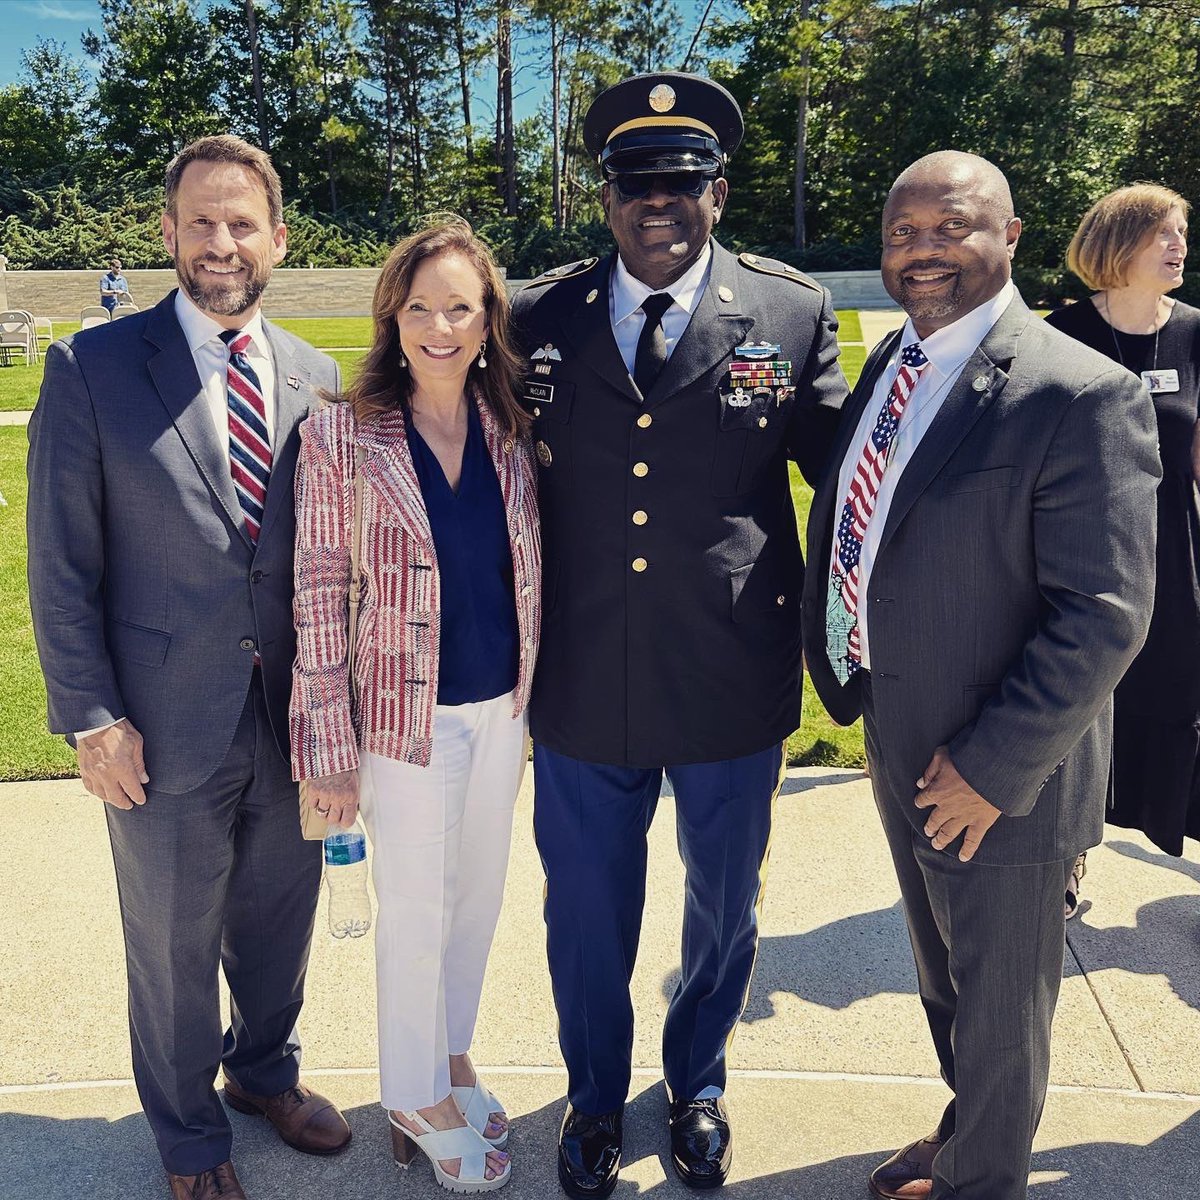 CSM Jerry McClain delivered moving remarks at the Memorial Day service at the Alabama National Cemetery. Army Ranger, 25-year veteran, one of America’s finest! Thank you for your service, Sergeant Major! #AlabamaNationalCemetery @sdubose1